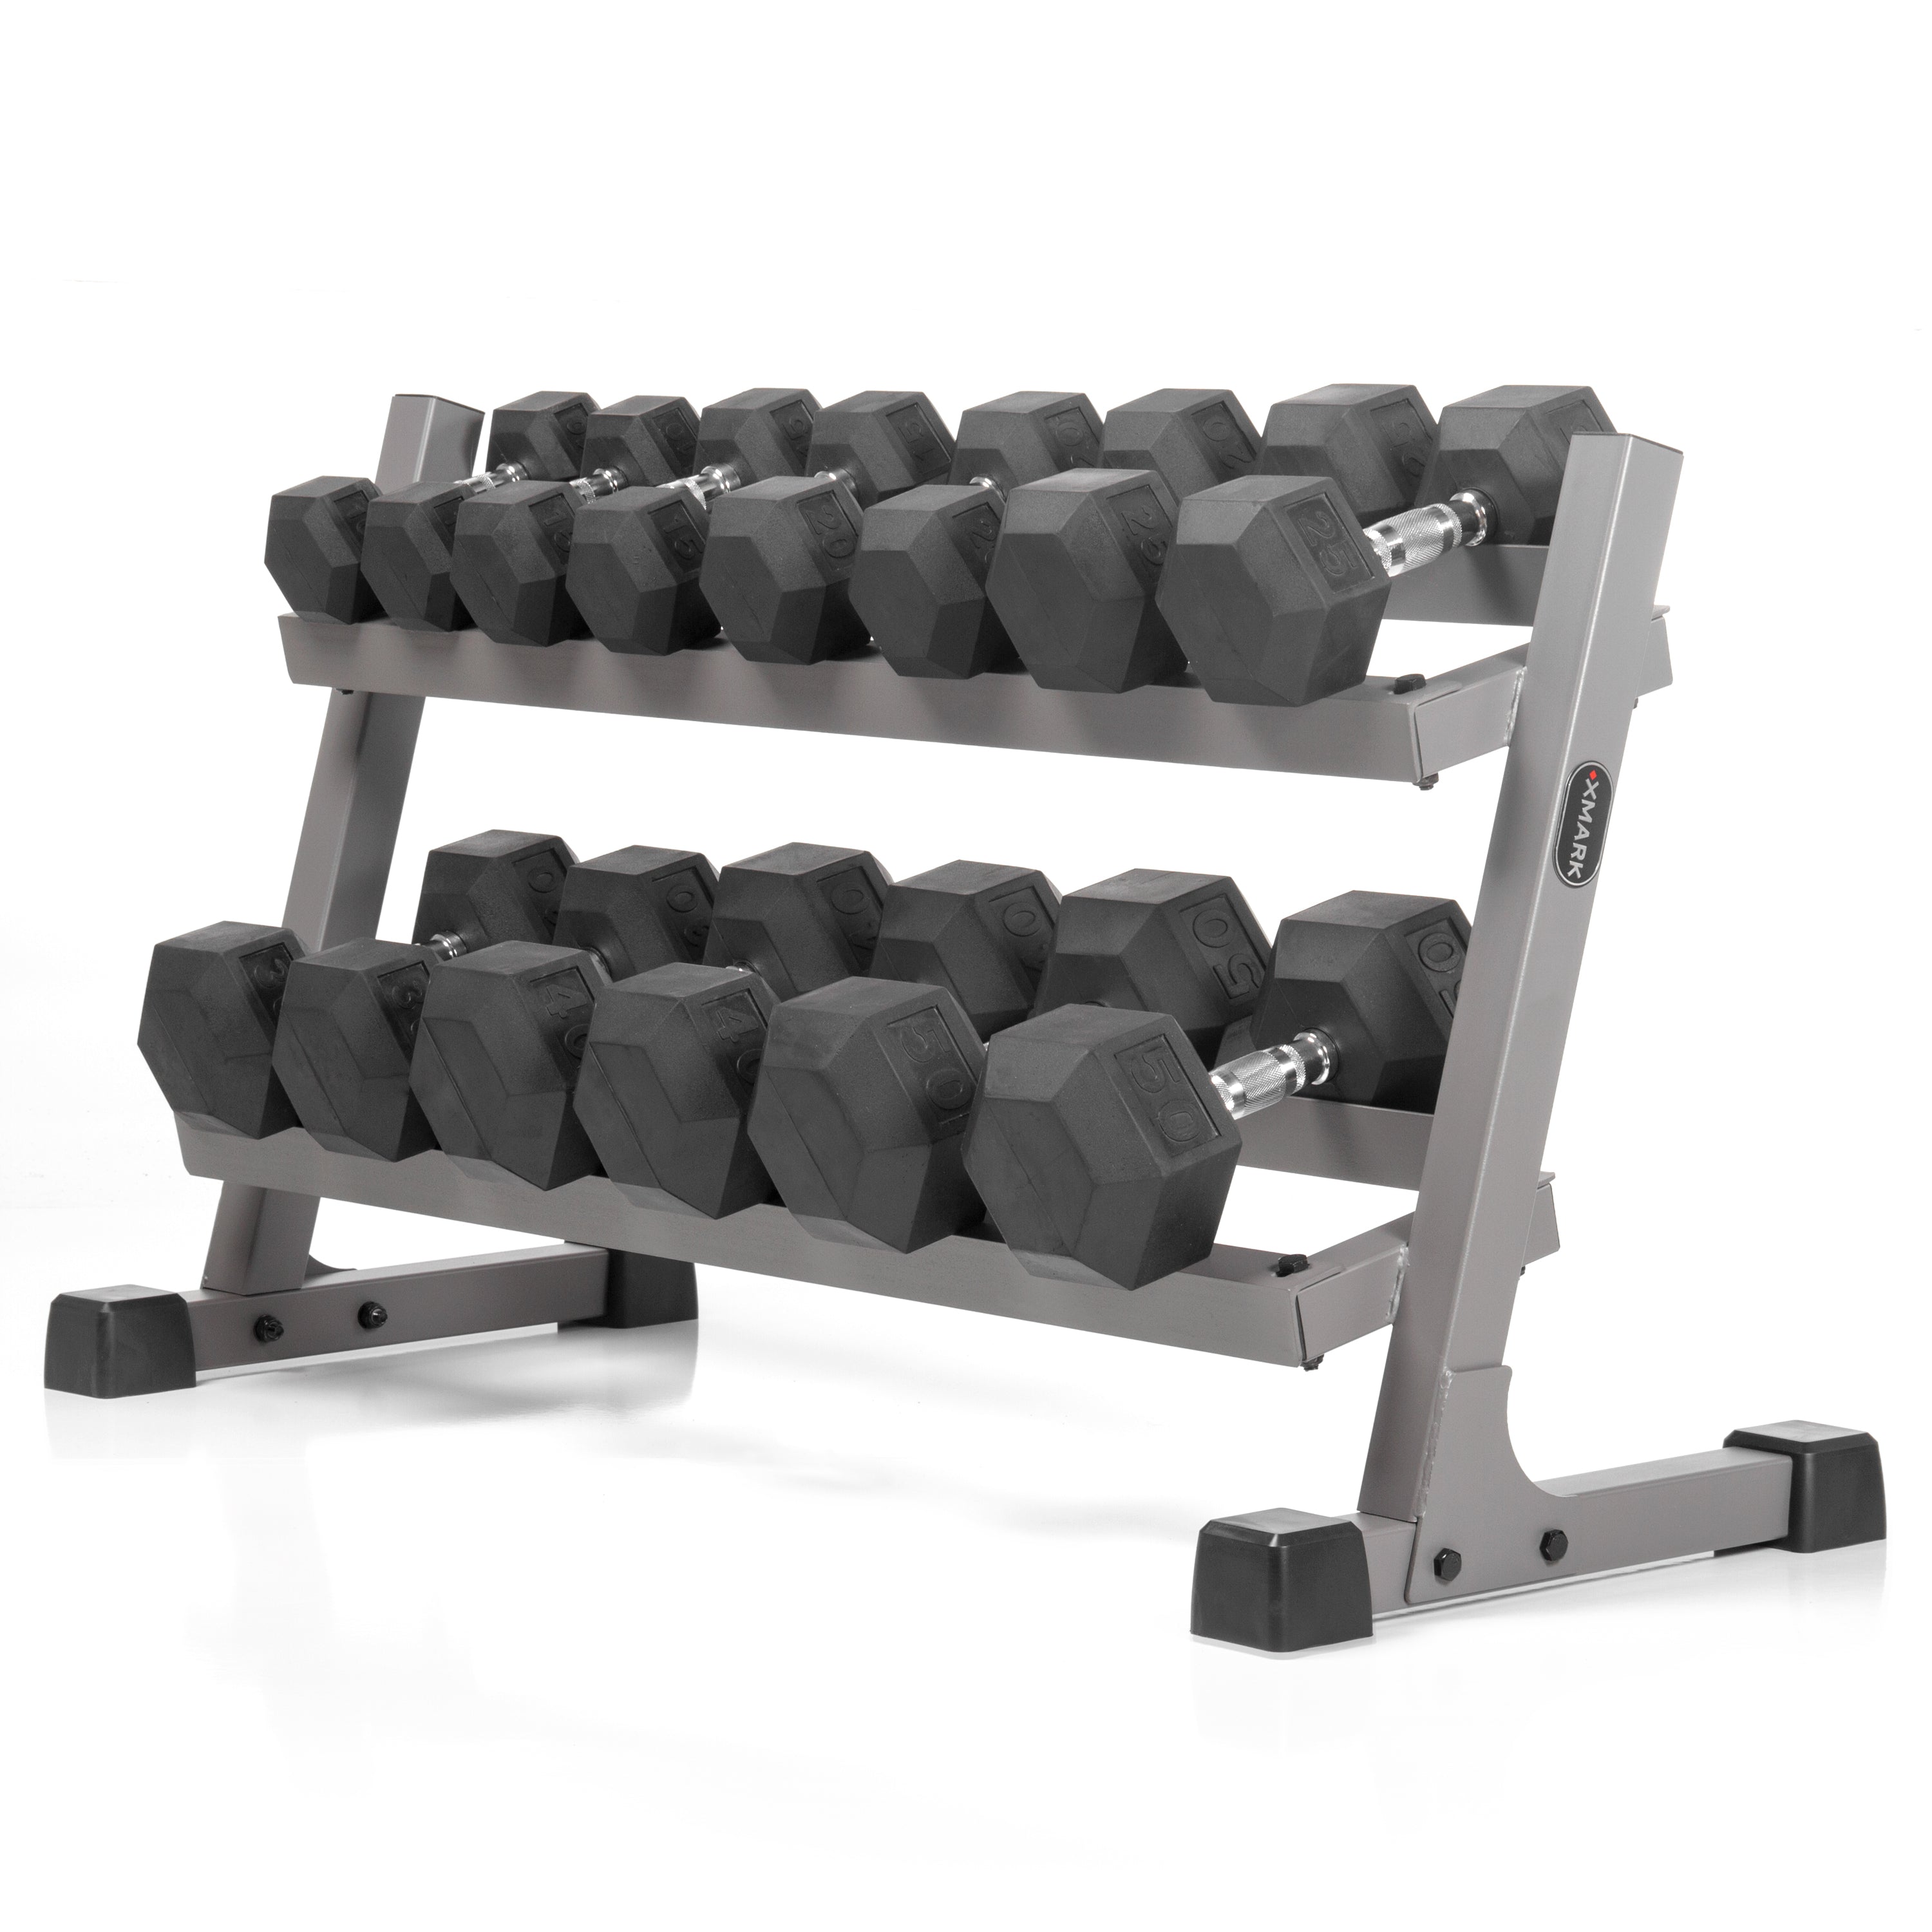 Shop Weights, Dumbbells, Sets, Training Benches